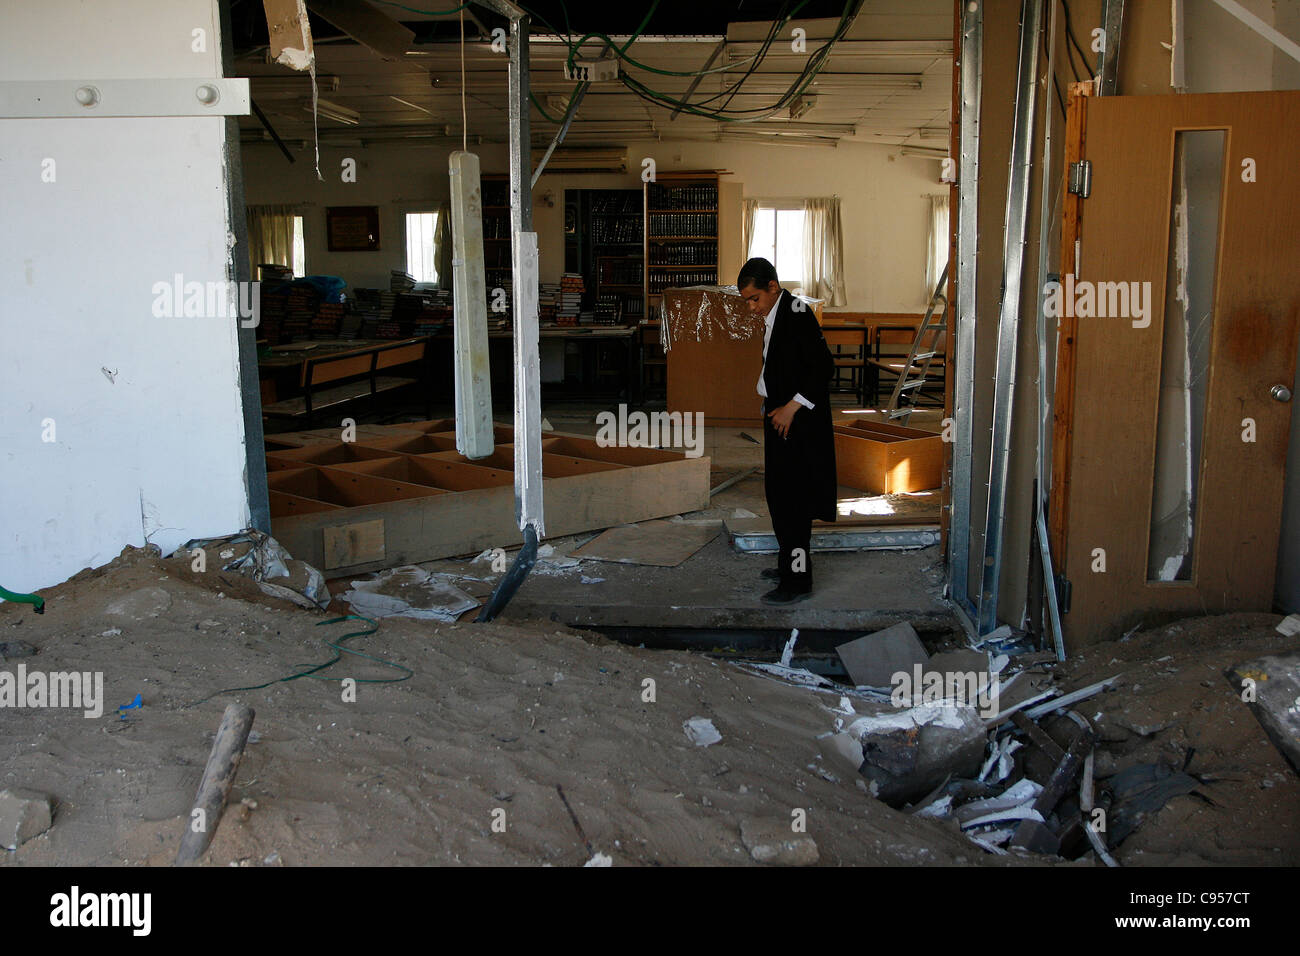 A Jewish boy is observing the destruction of the furnishings of the local synagogue after a grad rocket attack in Ashdod, Israel Stock Photo